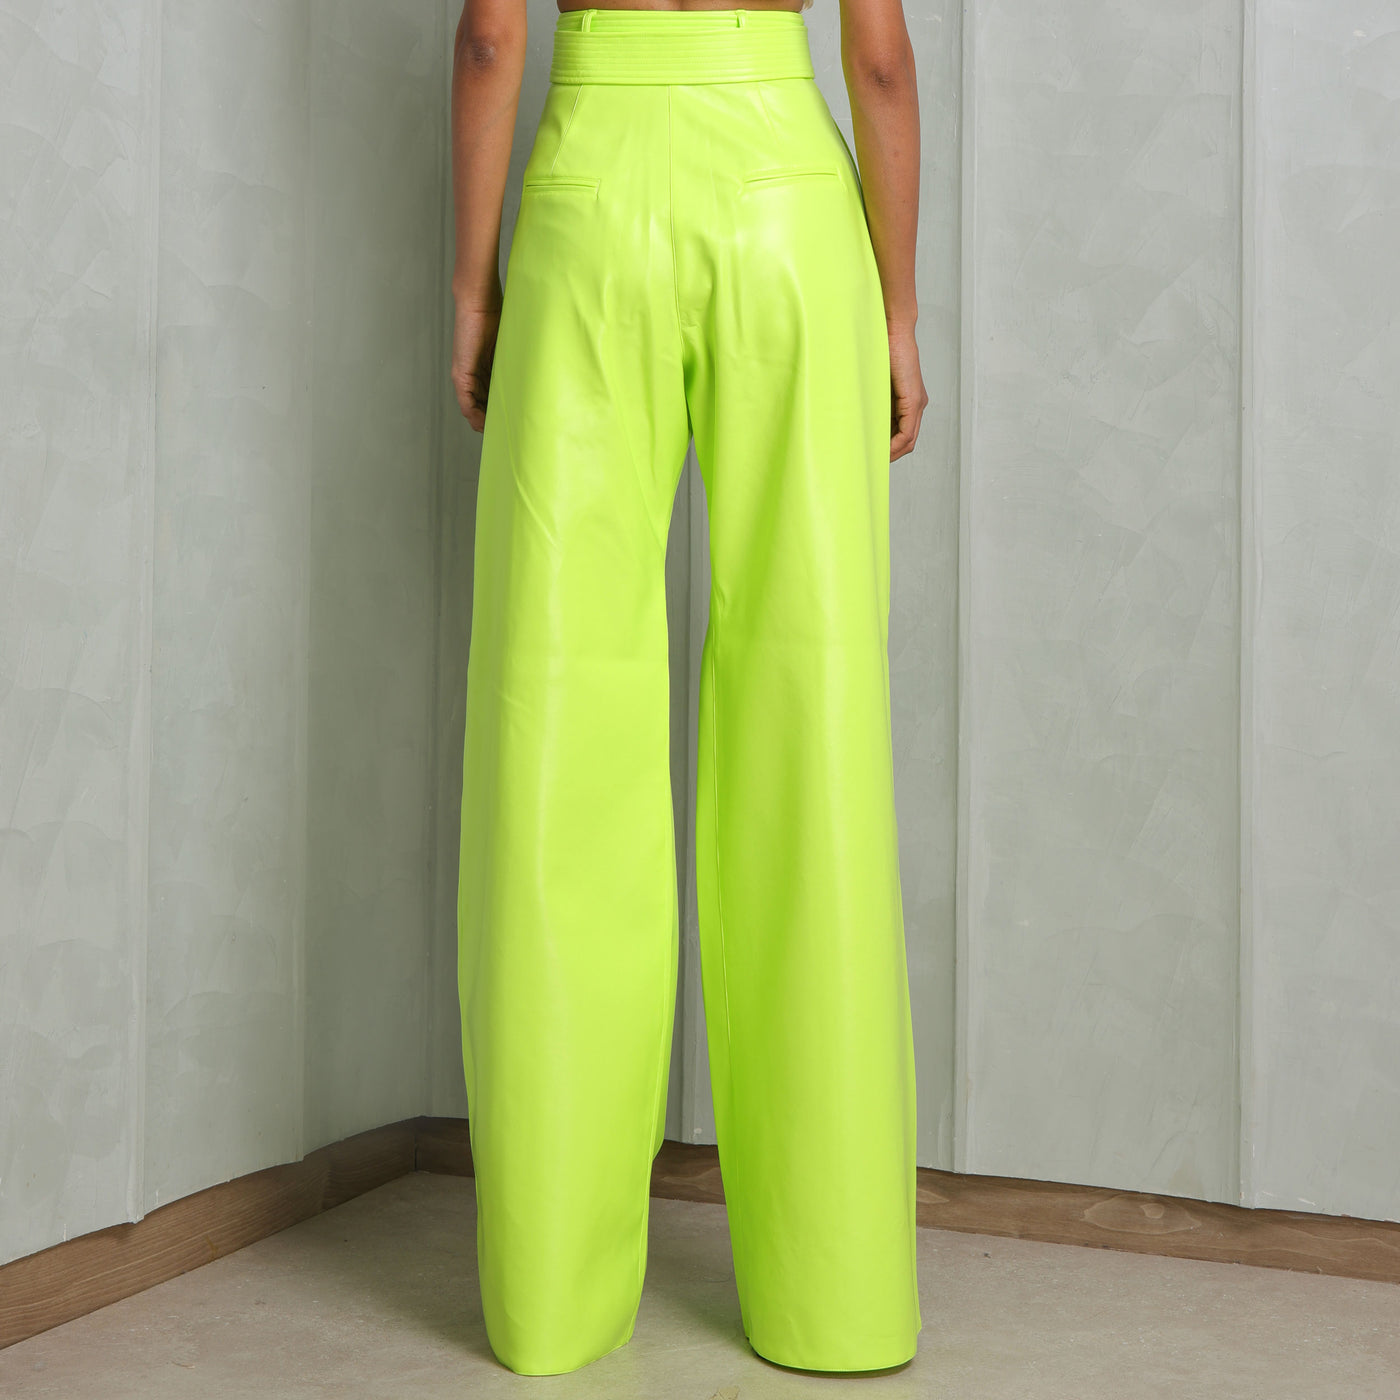 ALEX PERRY wide leg yellow belted pants